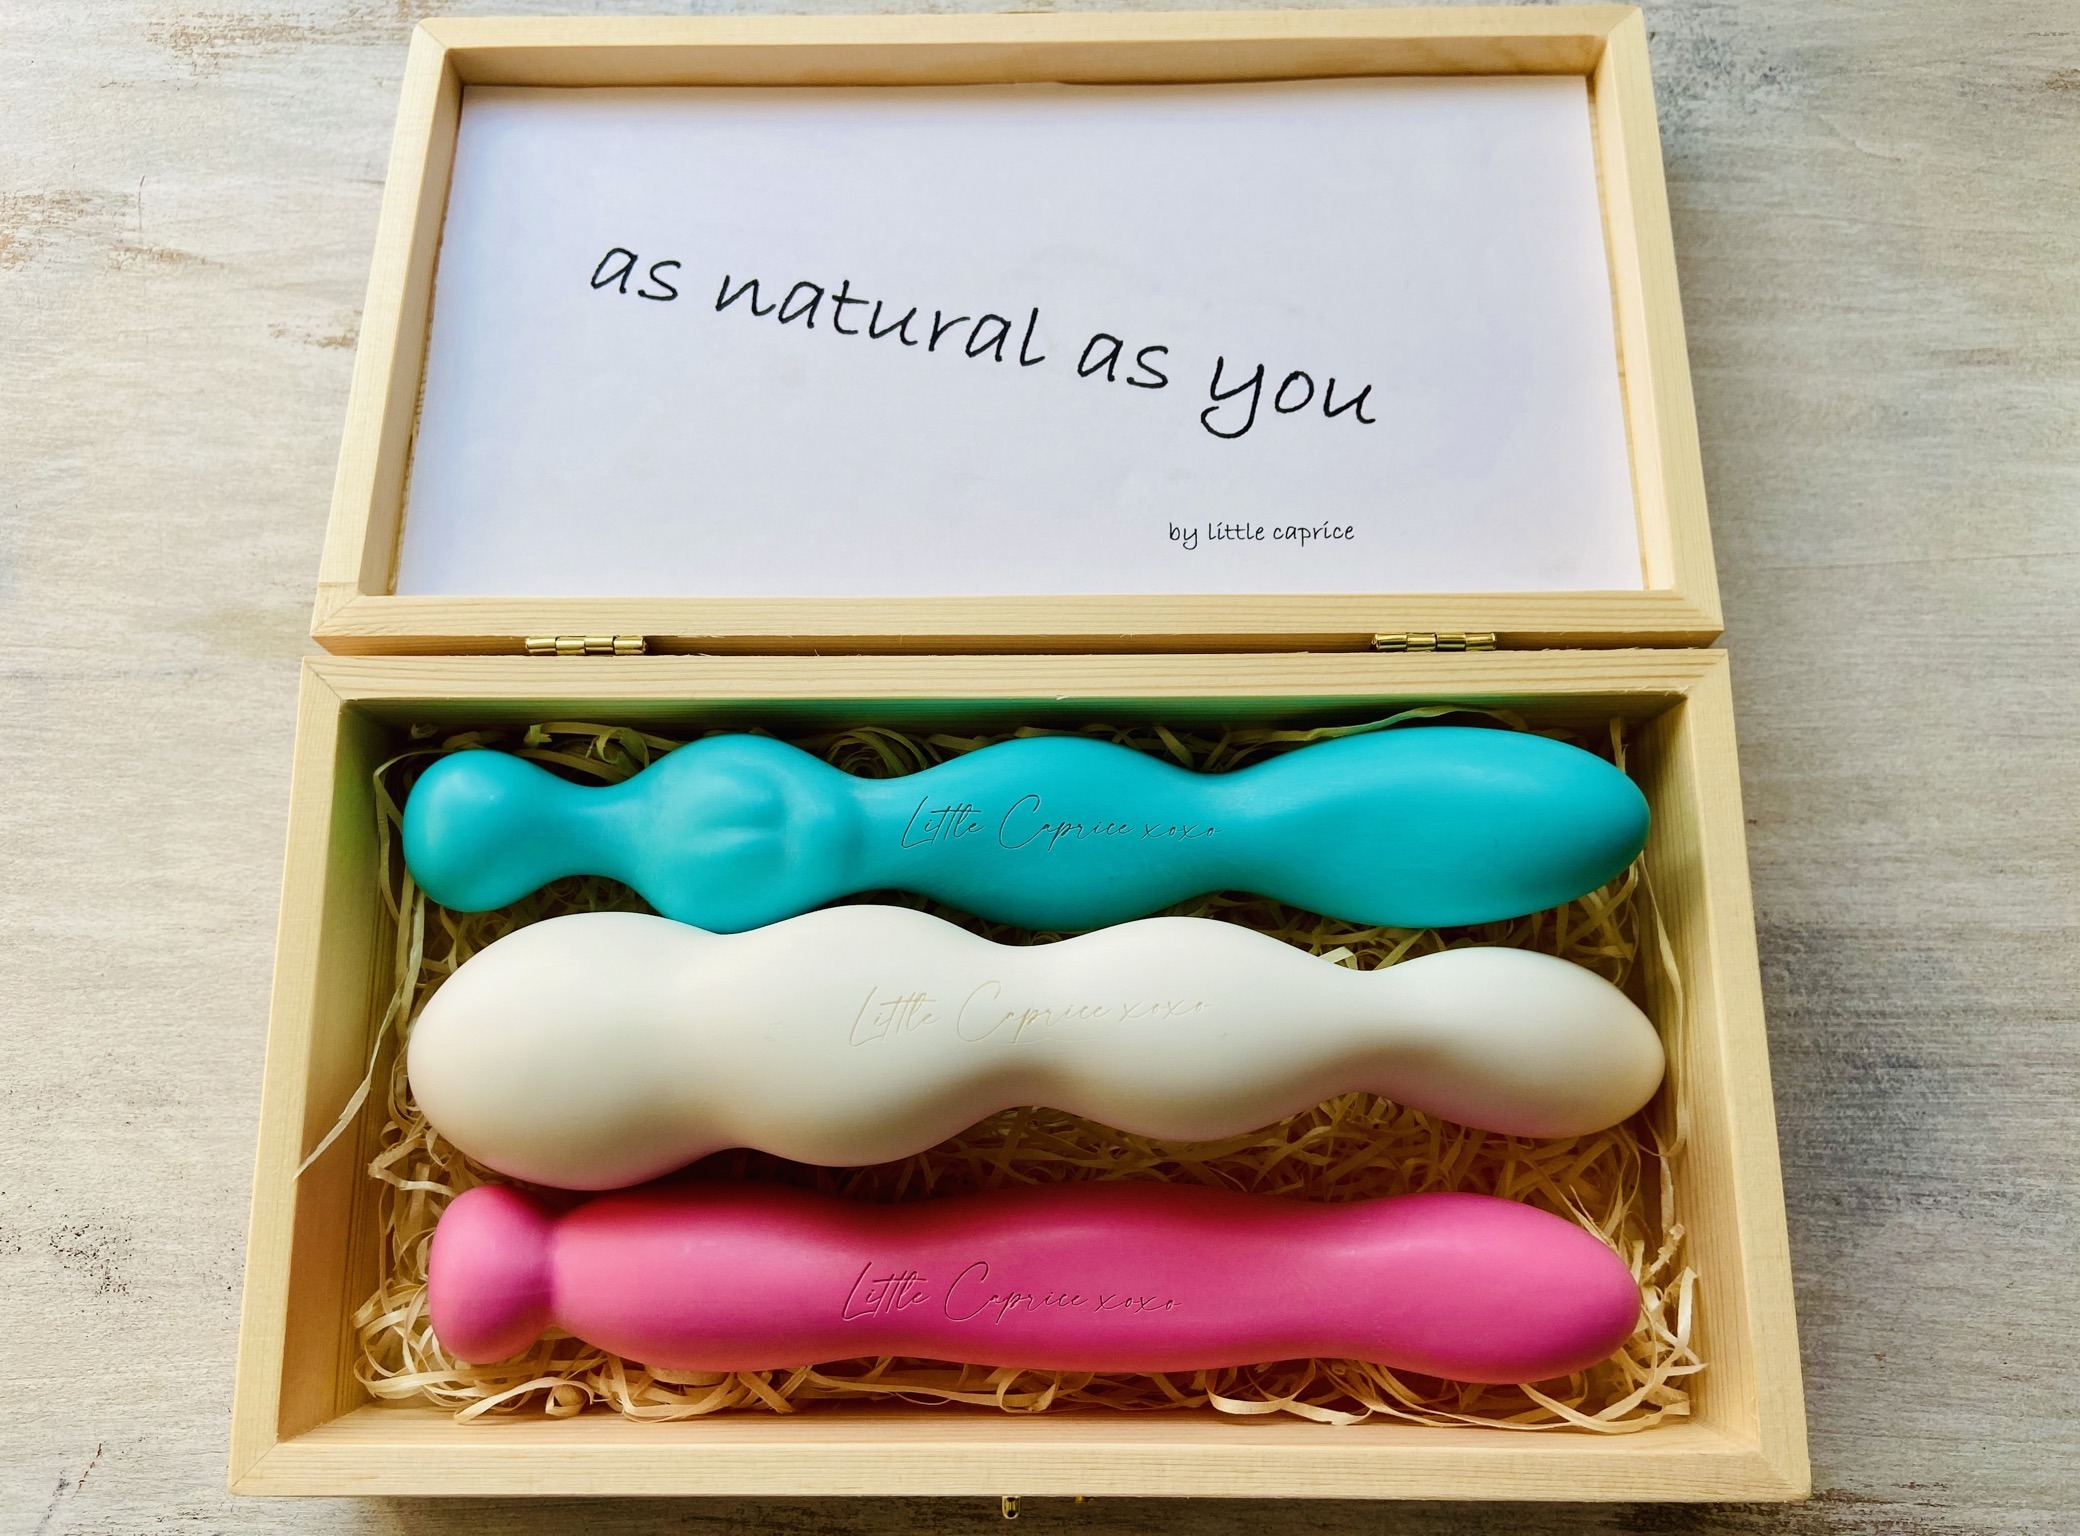 New product! Organic sex toy AUCTION